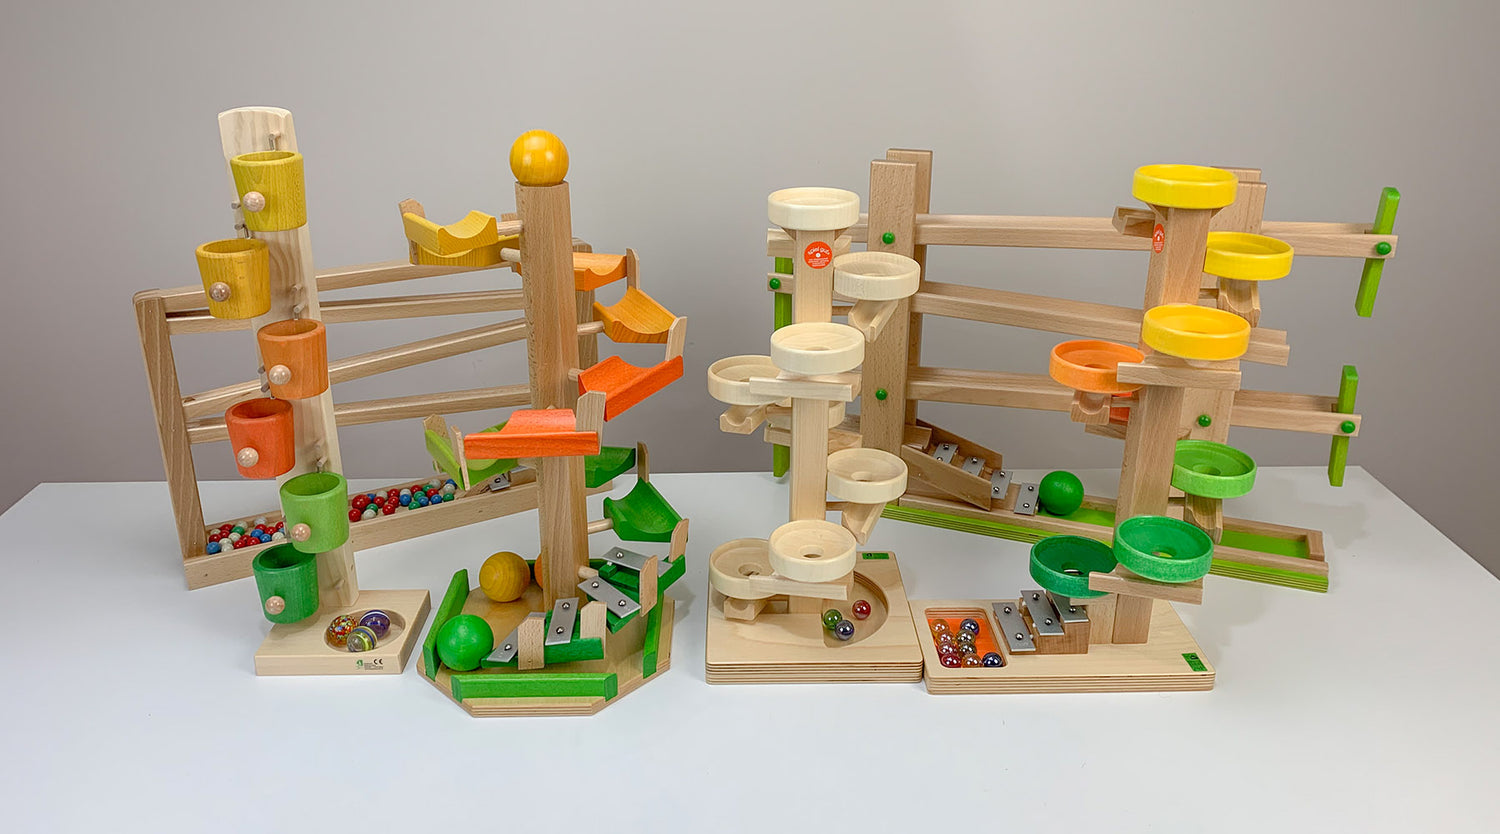 Beck Wooden Toys Marble Runs and Track Toys from Oskar's Wooden Ark in Australia